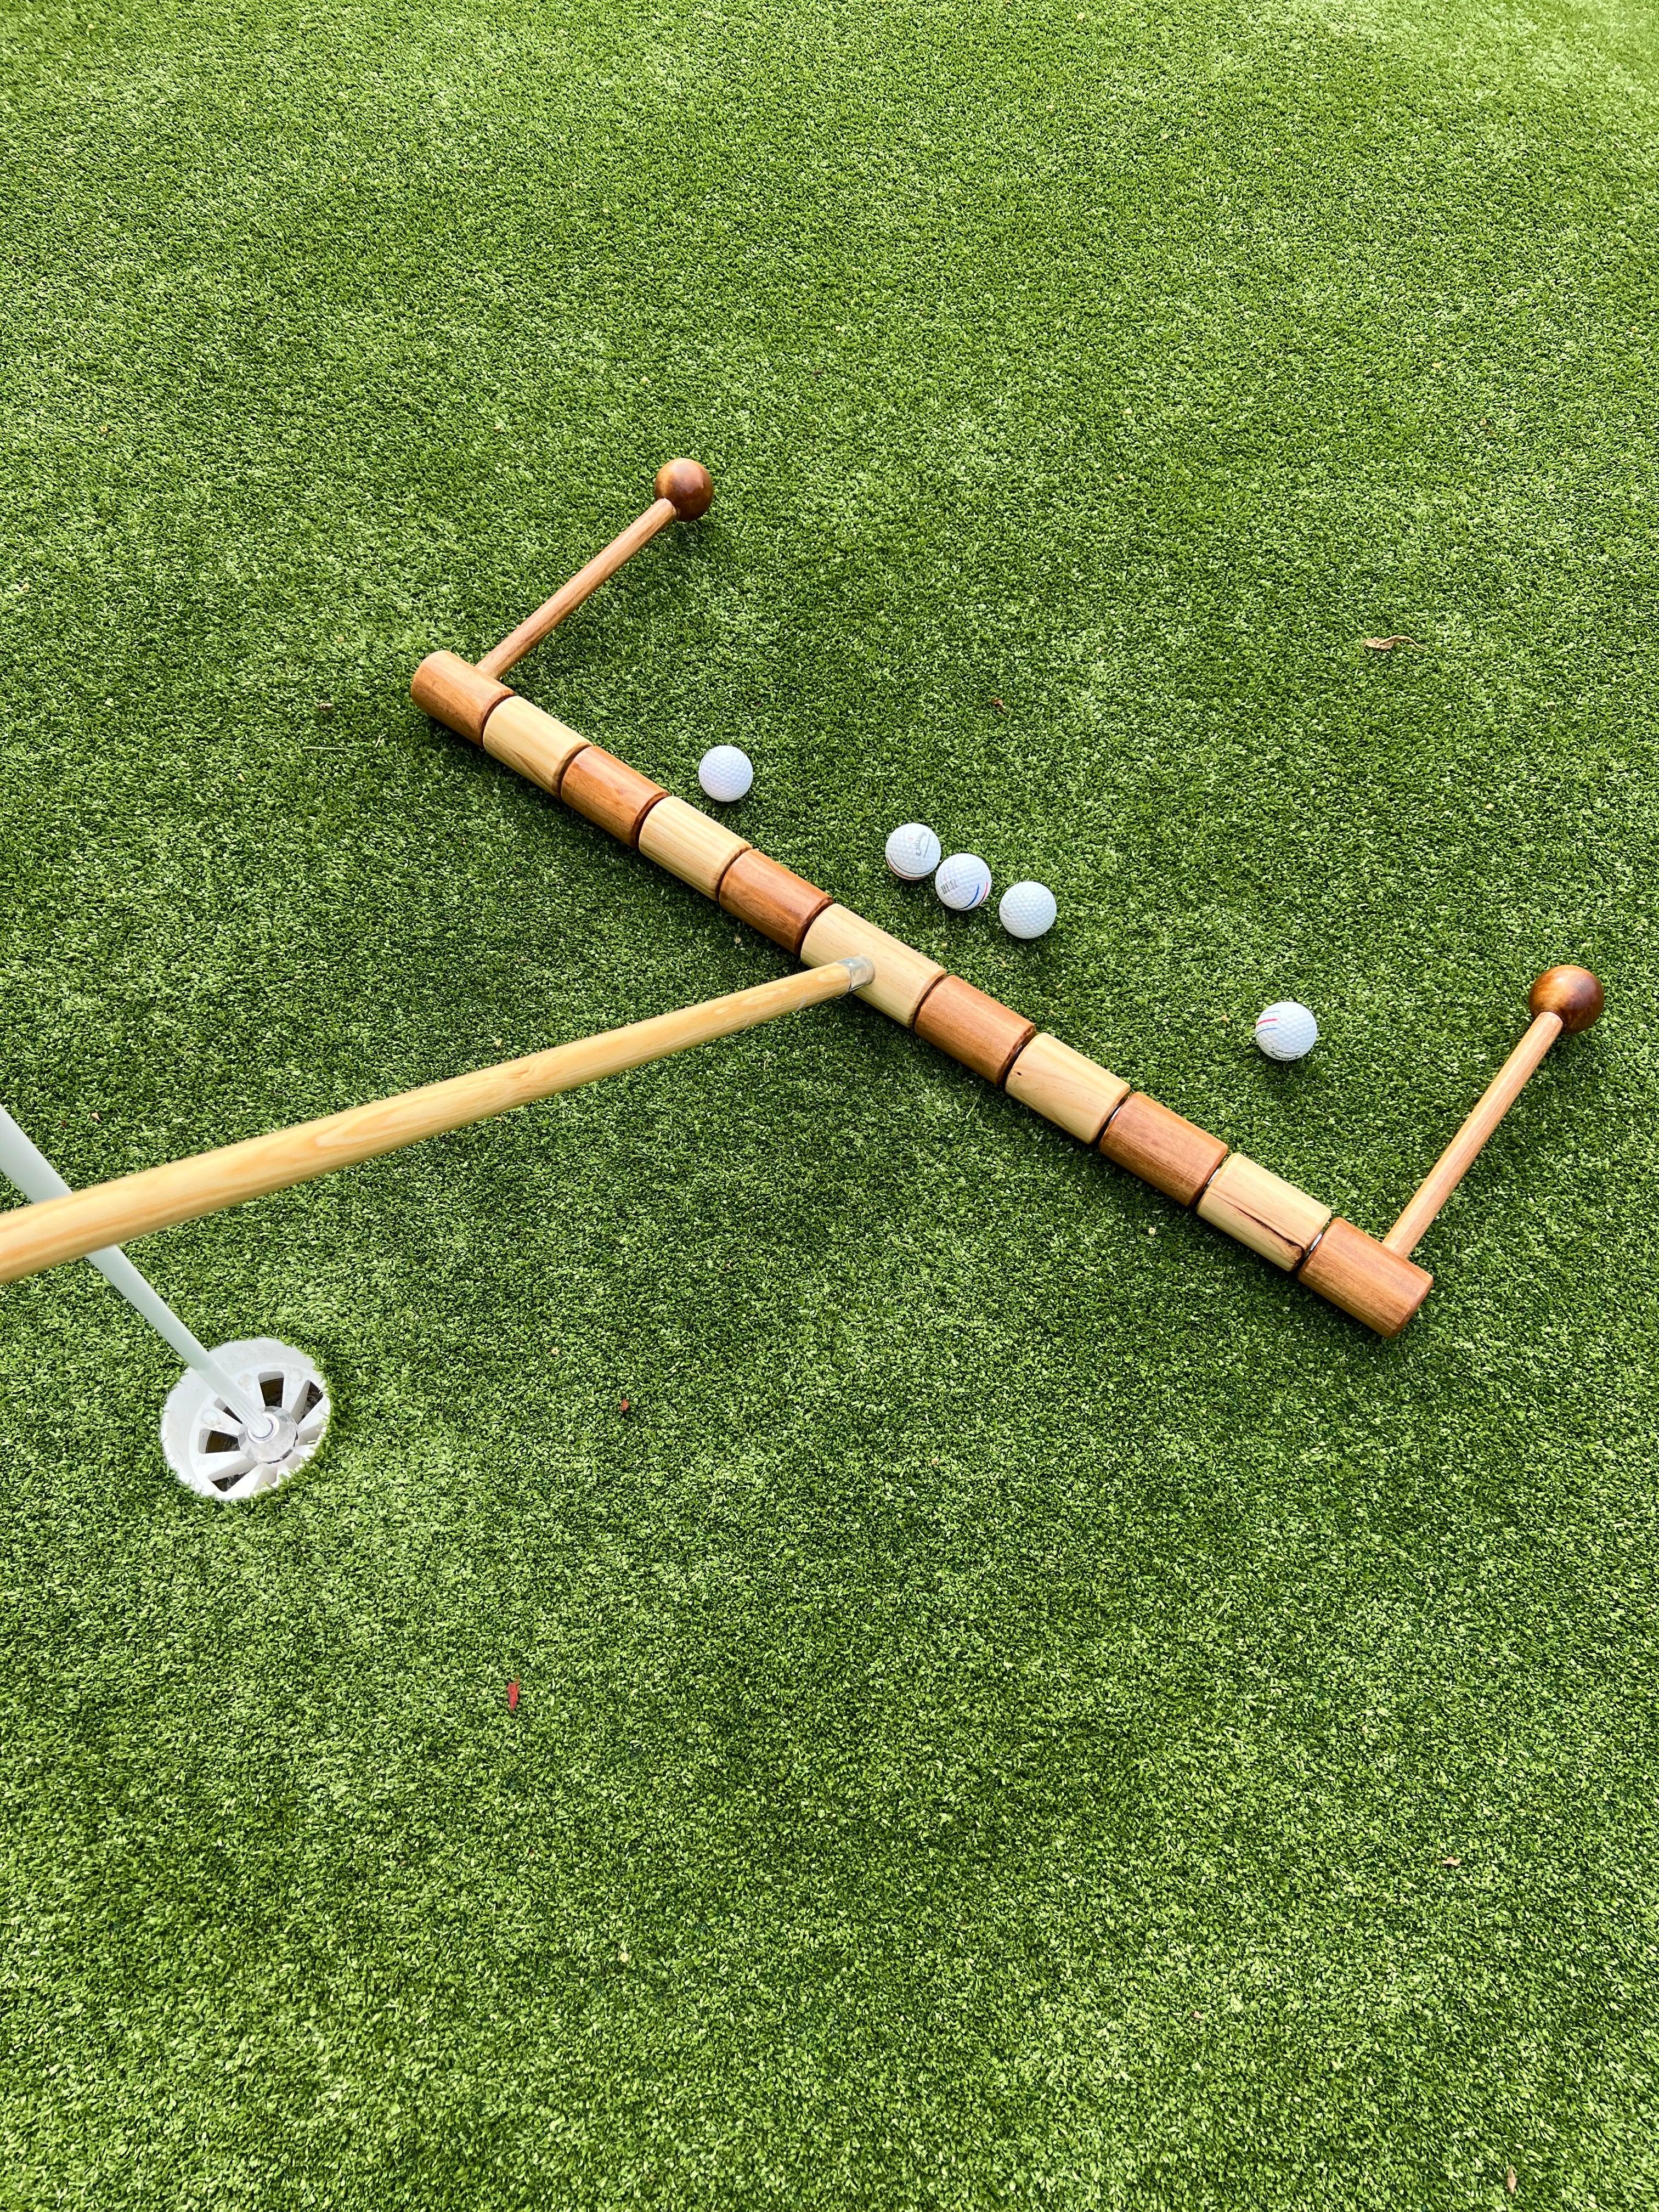 YGT Golf Course Equipment,golf Driving Range Equipment For Sale